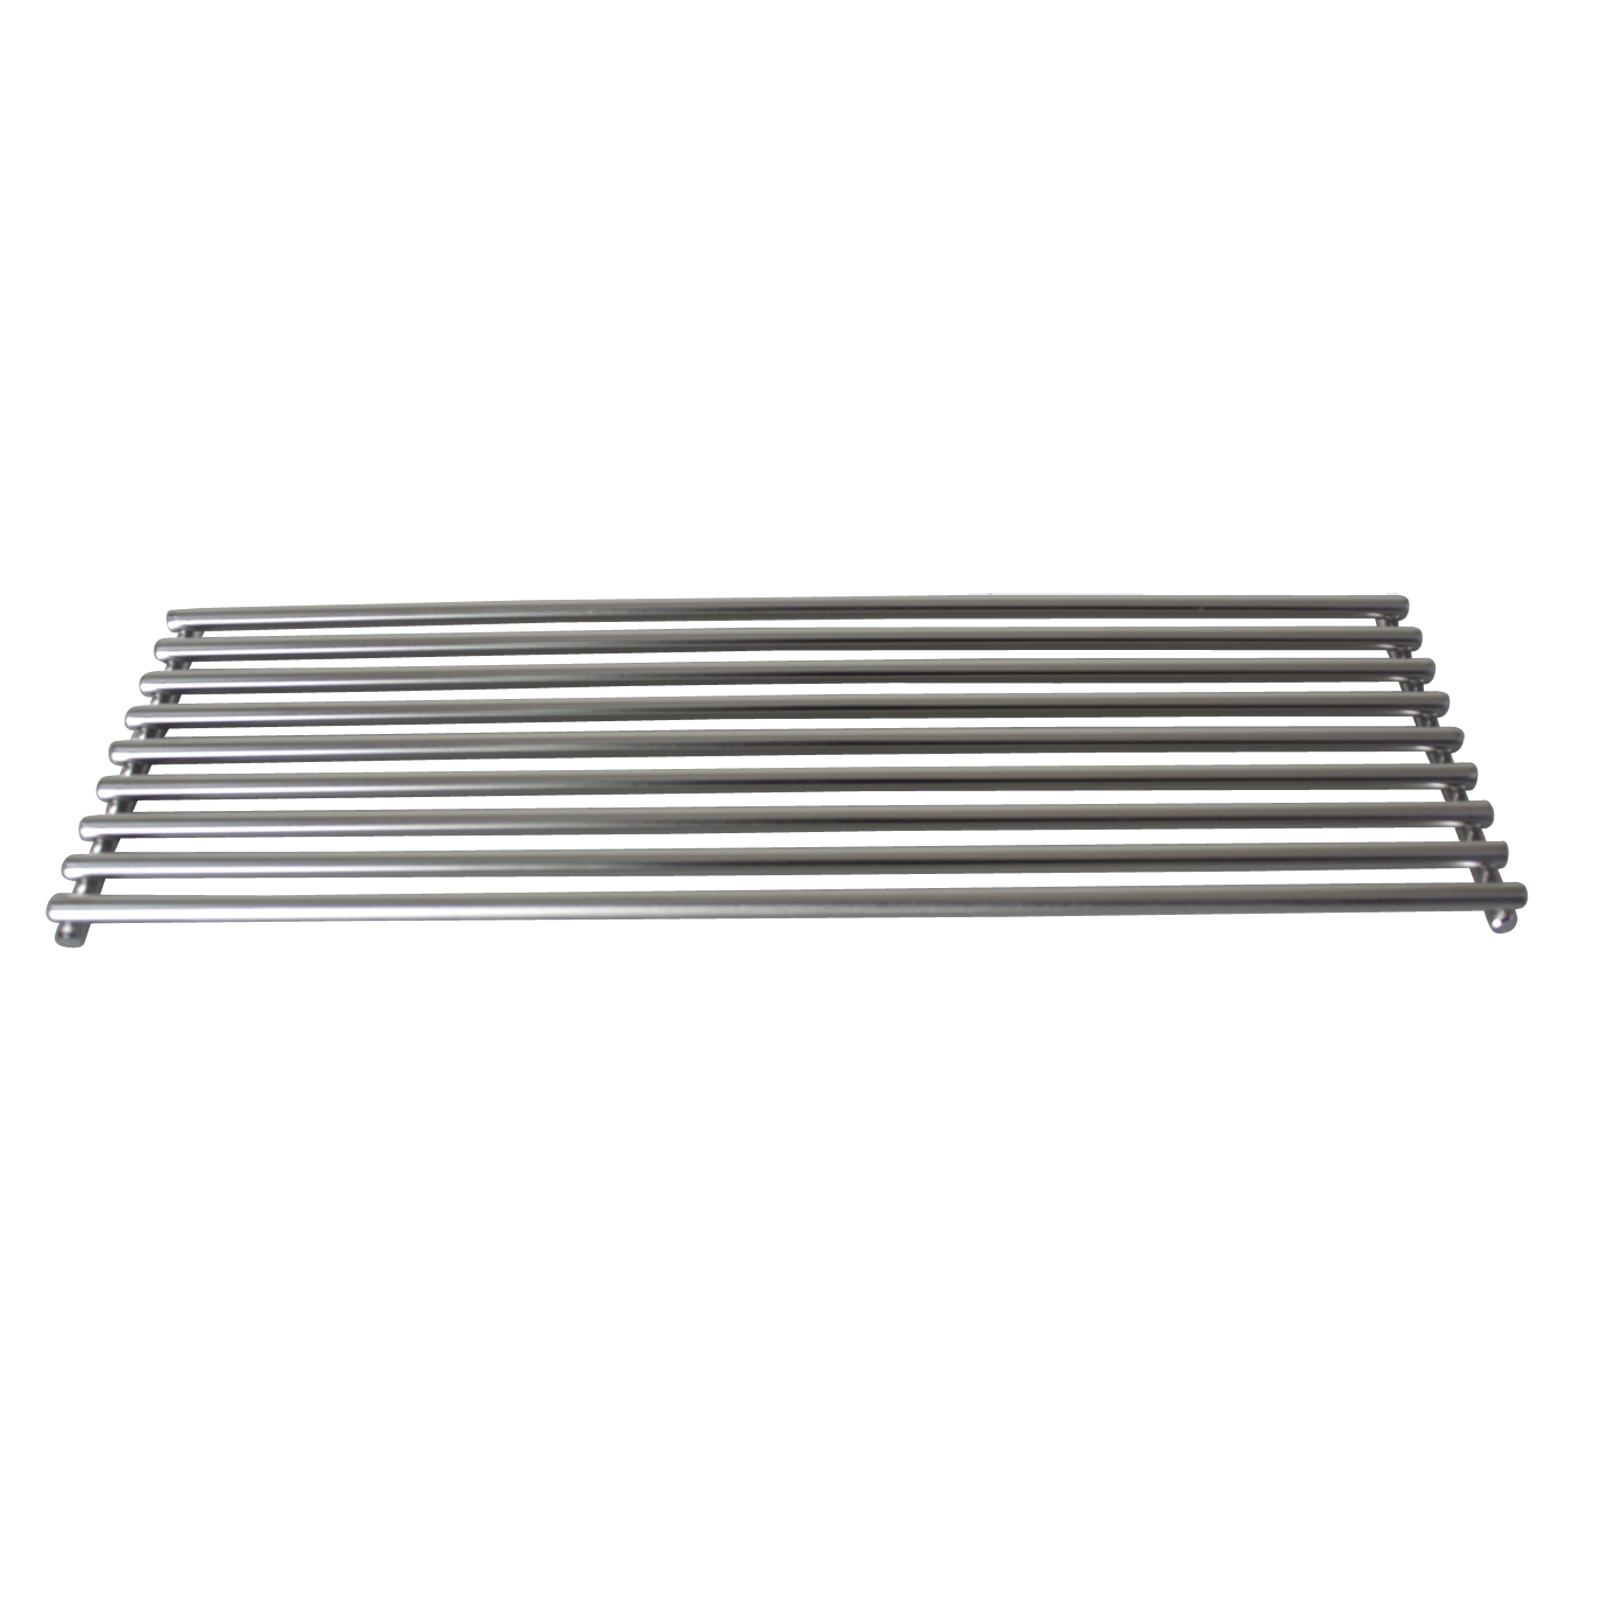 BeefEater Signature Stainless Steel BBQ Grill Plate 160mm x 480mm - 94382